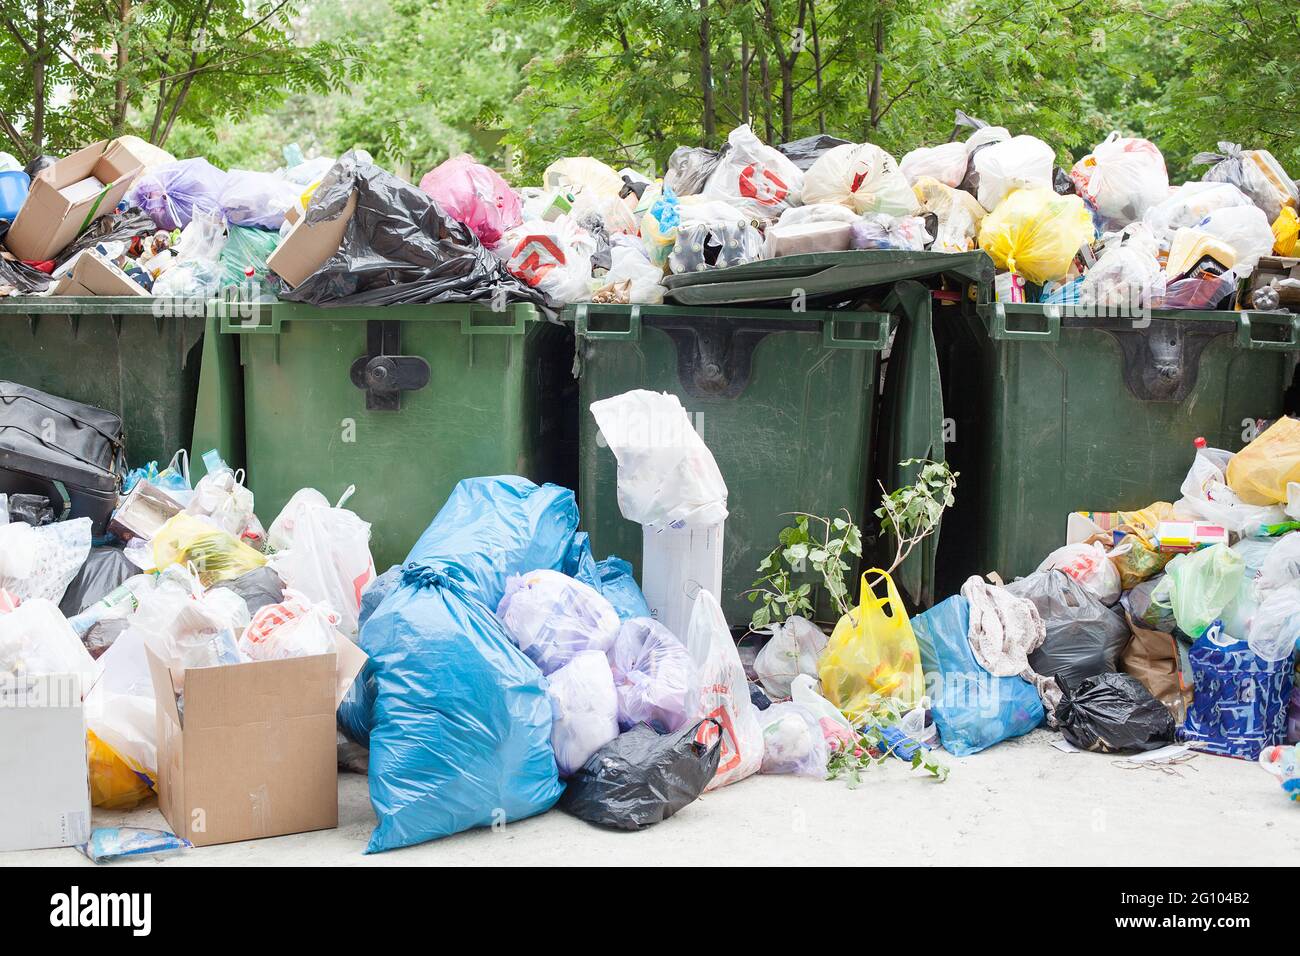 https://c8.alamy.com/comp/2G104B2/overloaded-dumpster-full-garbage-container-household-garbage-bin-trash-can-heap-of-unsorted-rubbish-plastic-bags-pile-of-refuse-litter-waste-2G104B2.jpg